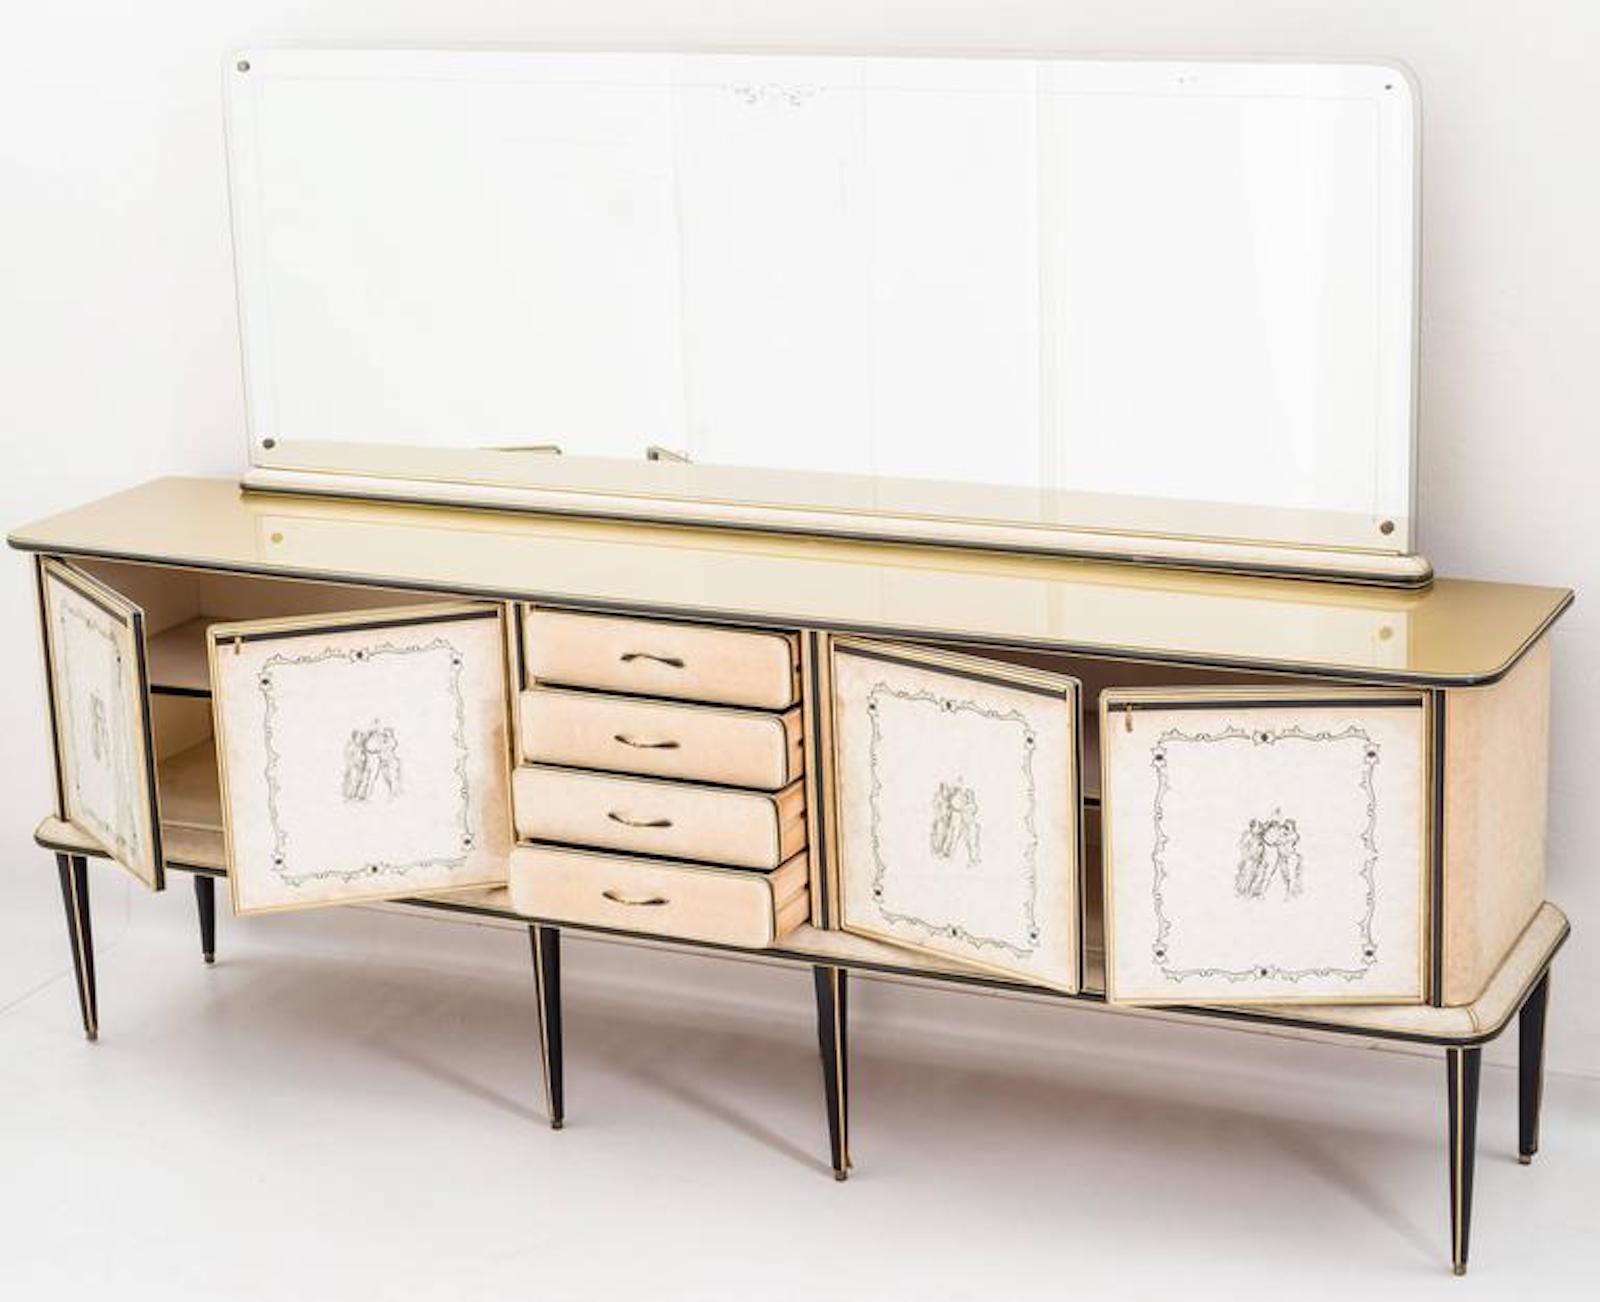 Aluminum Sideboard by Umberto Mascagni, 1950s For Sale